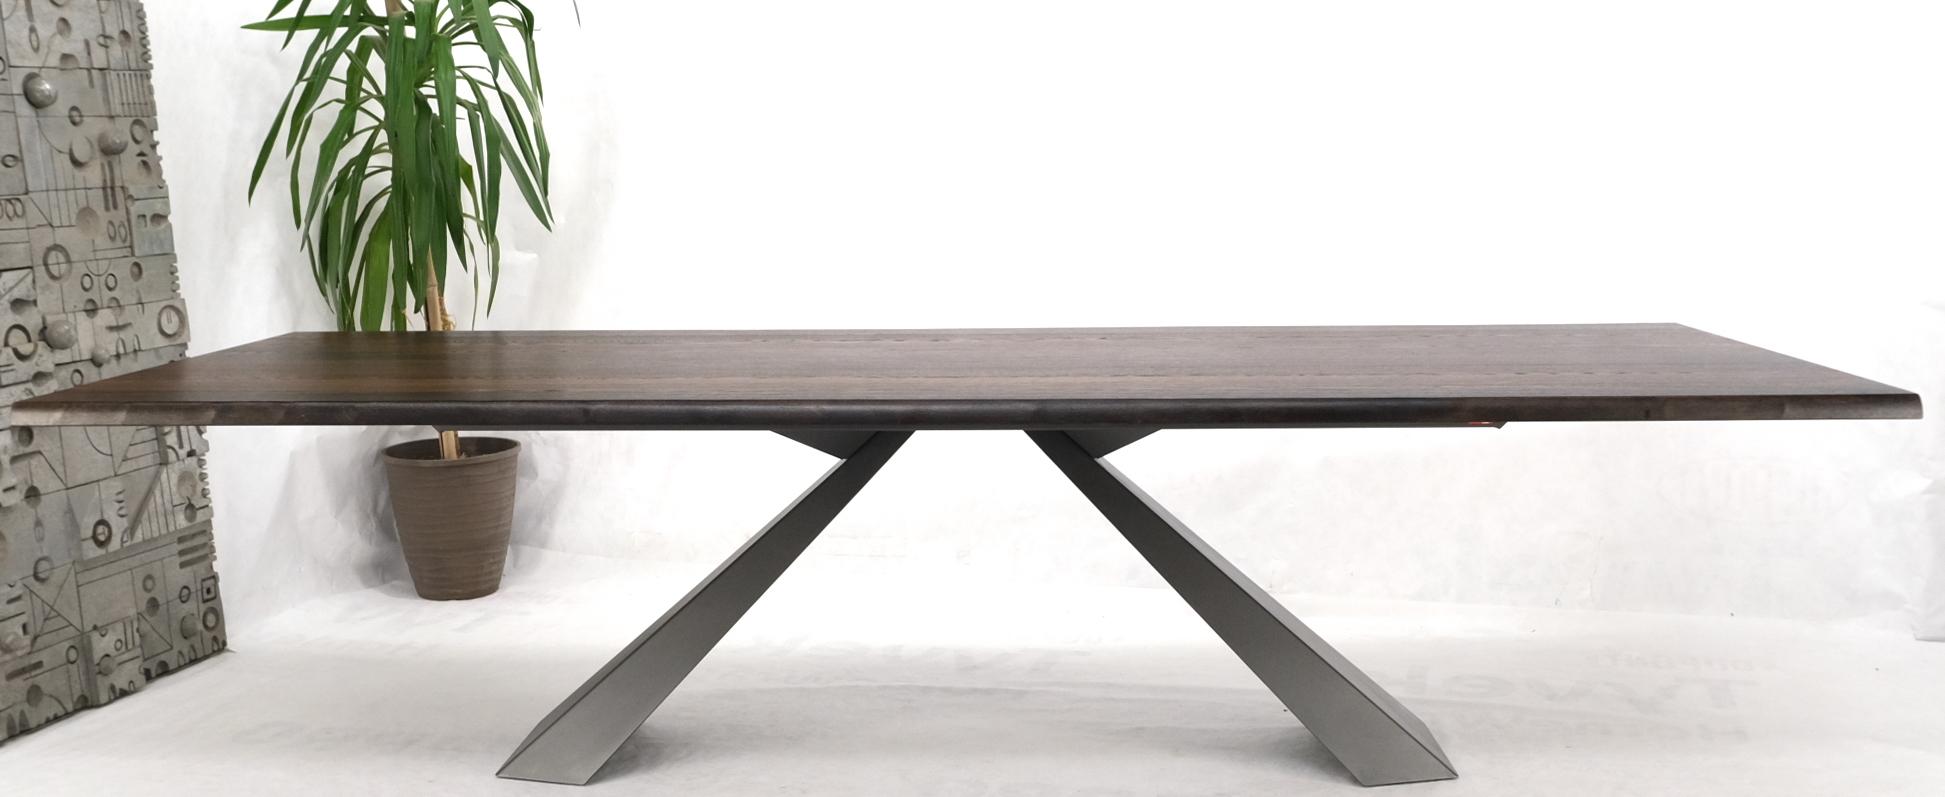 Lacquered Extra Long Live Edge Solid Walnut Boards Steel Base Italian Dining Table